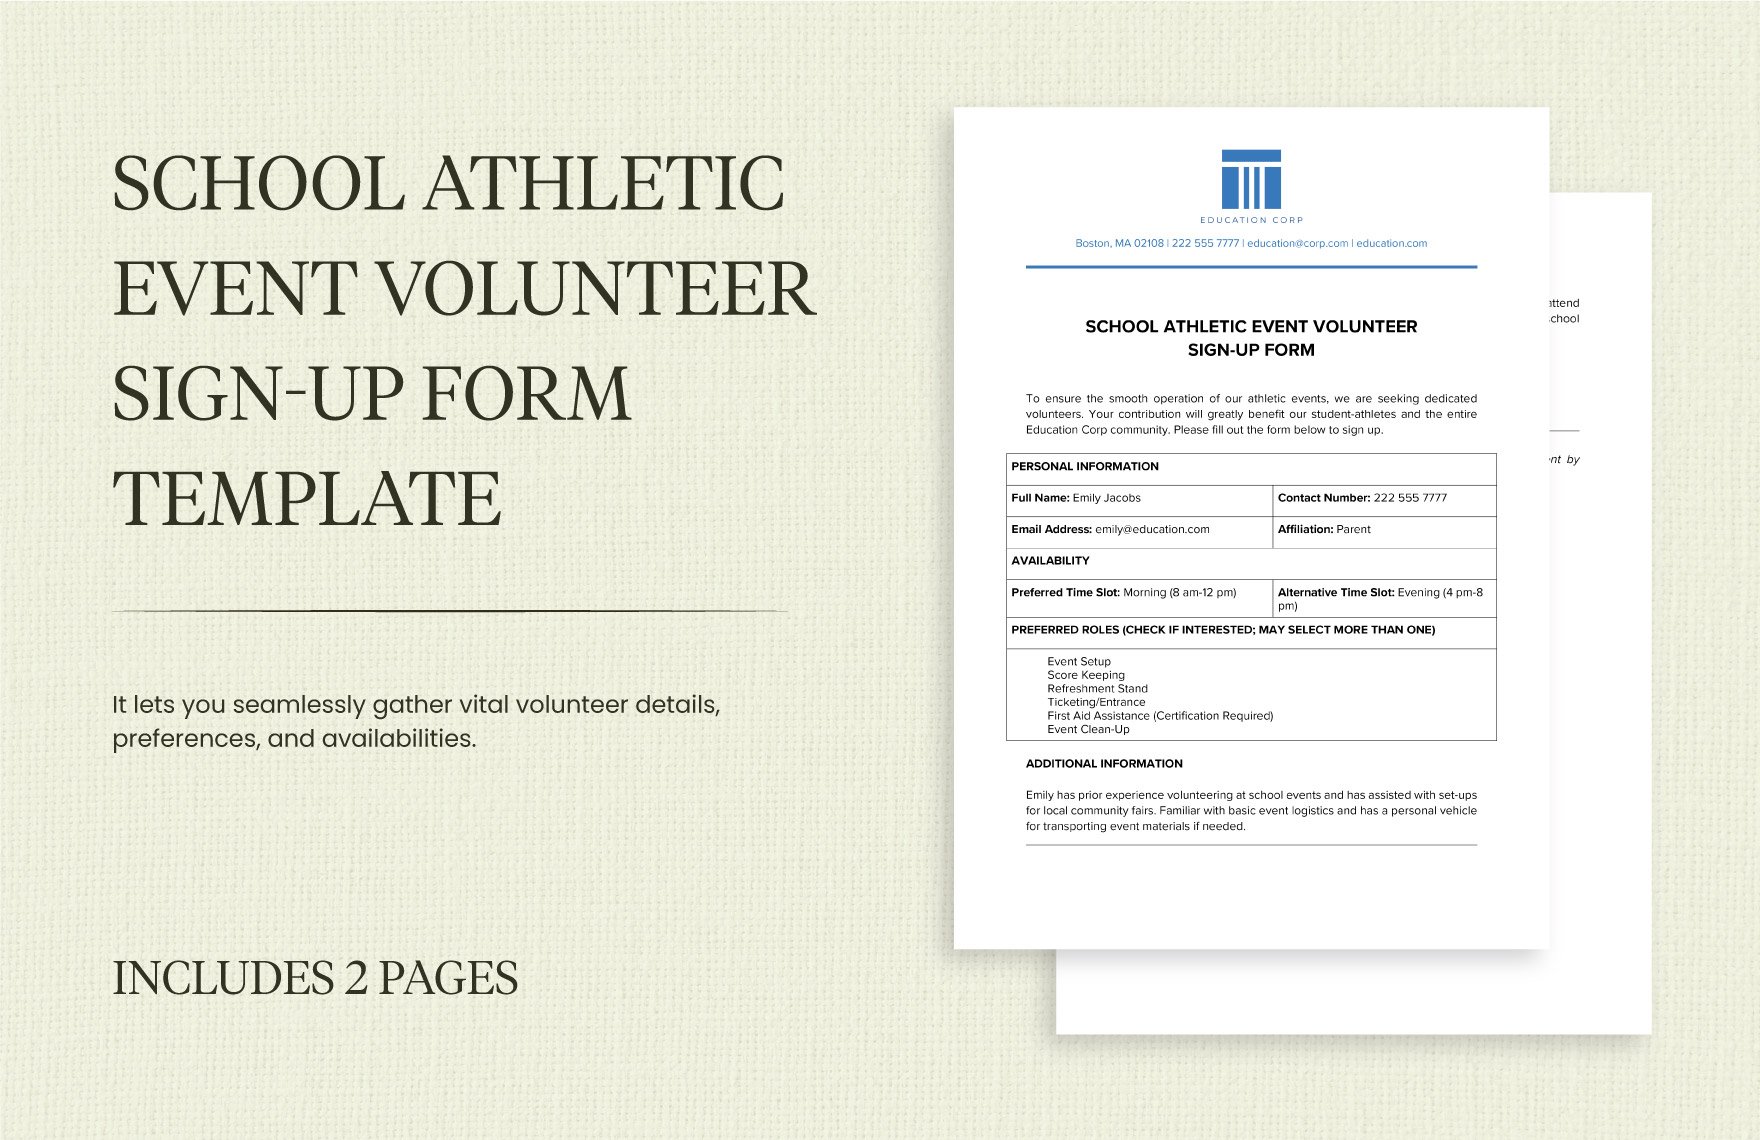 School Athletic Event Volunteer Sign-Up Form Template in Word, Google Docs, PDF